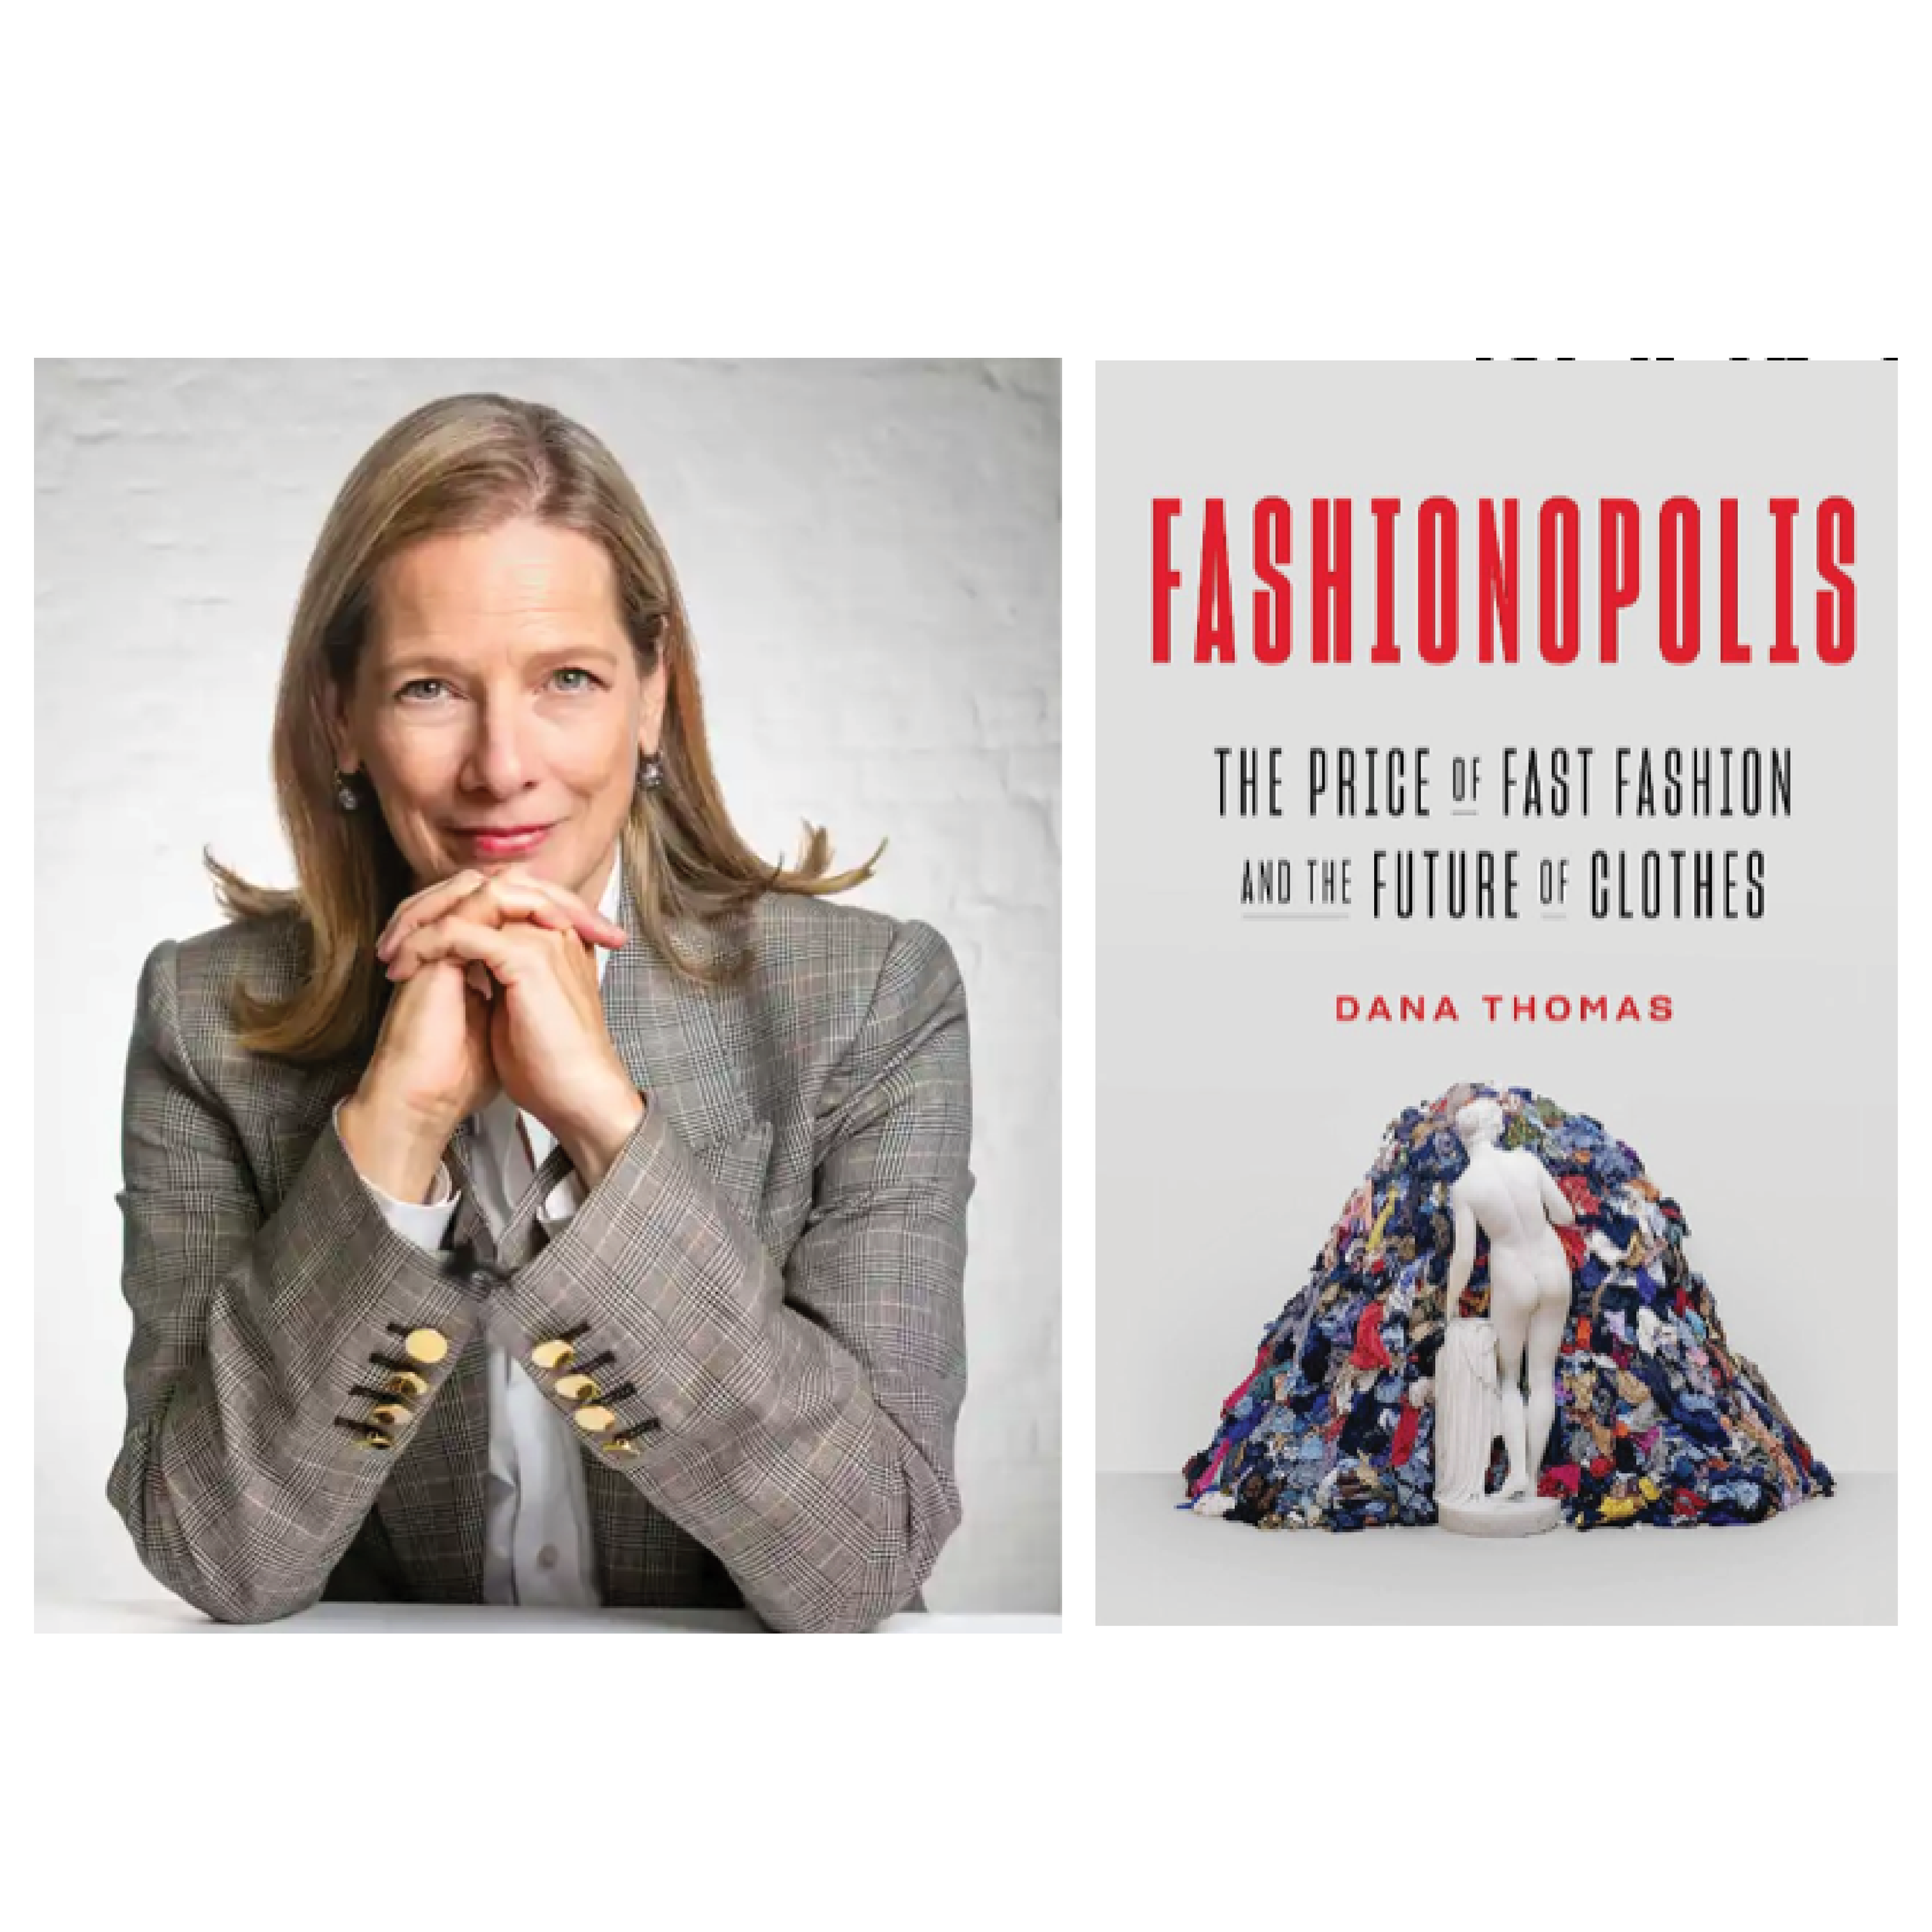 7 Eye-Opening Books About Fast Fashion to Rethink Your Wardrobe